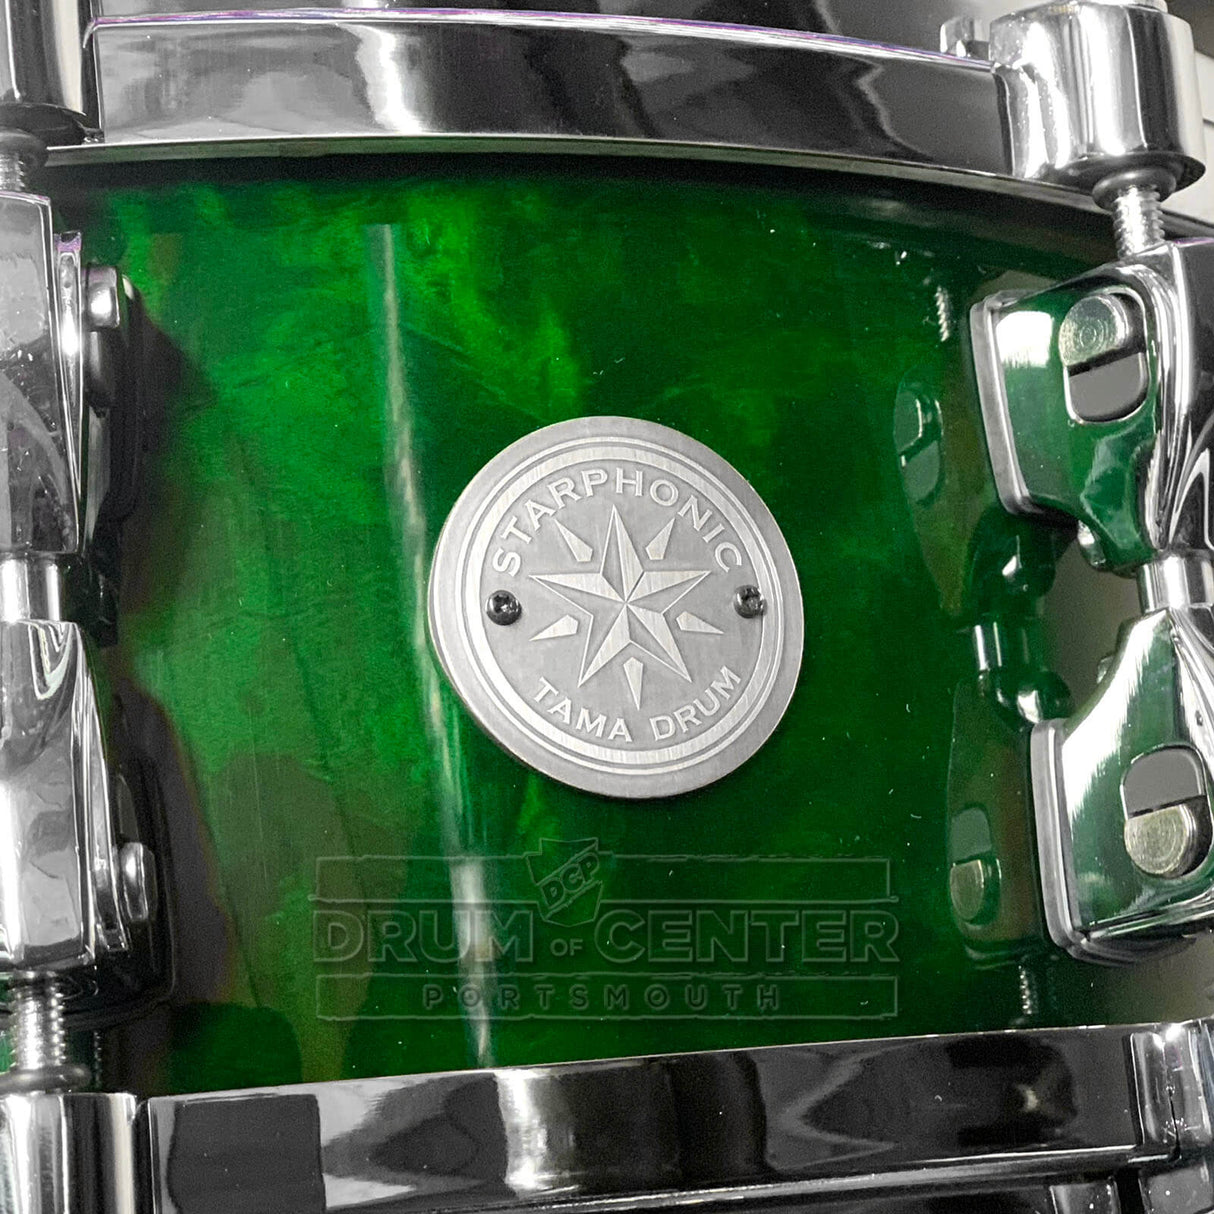 Tama Starphonic Maple Limited Edition Snare Drum 14x5 Emerald Figured Maple - Drum Center Of Portsmouth